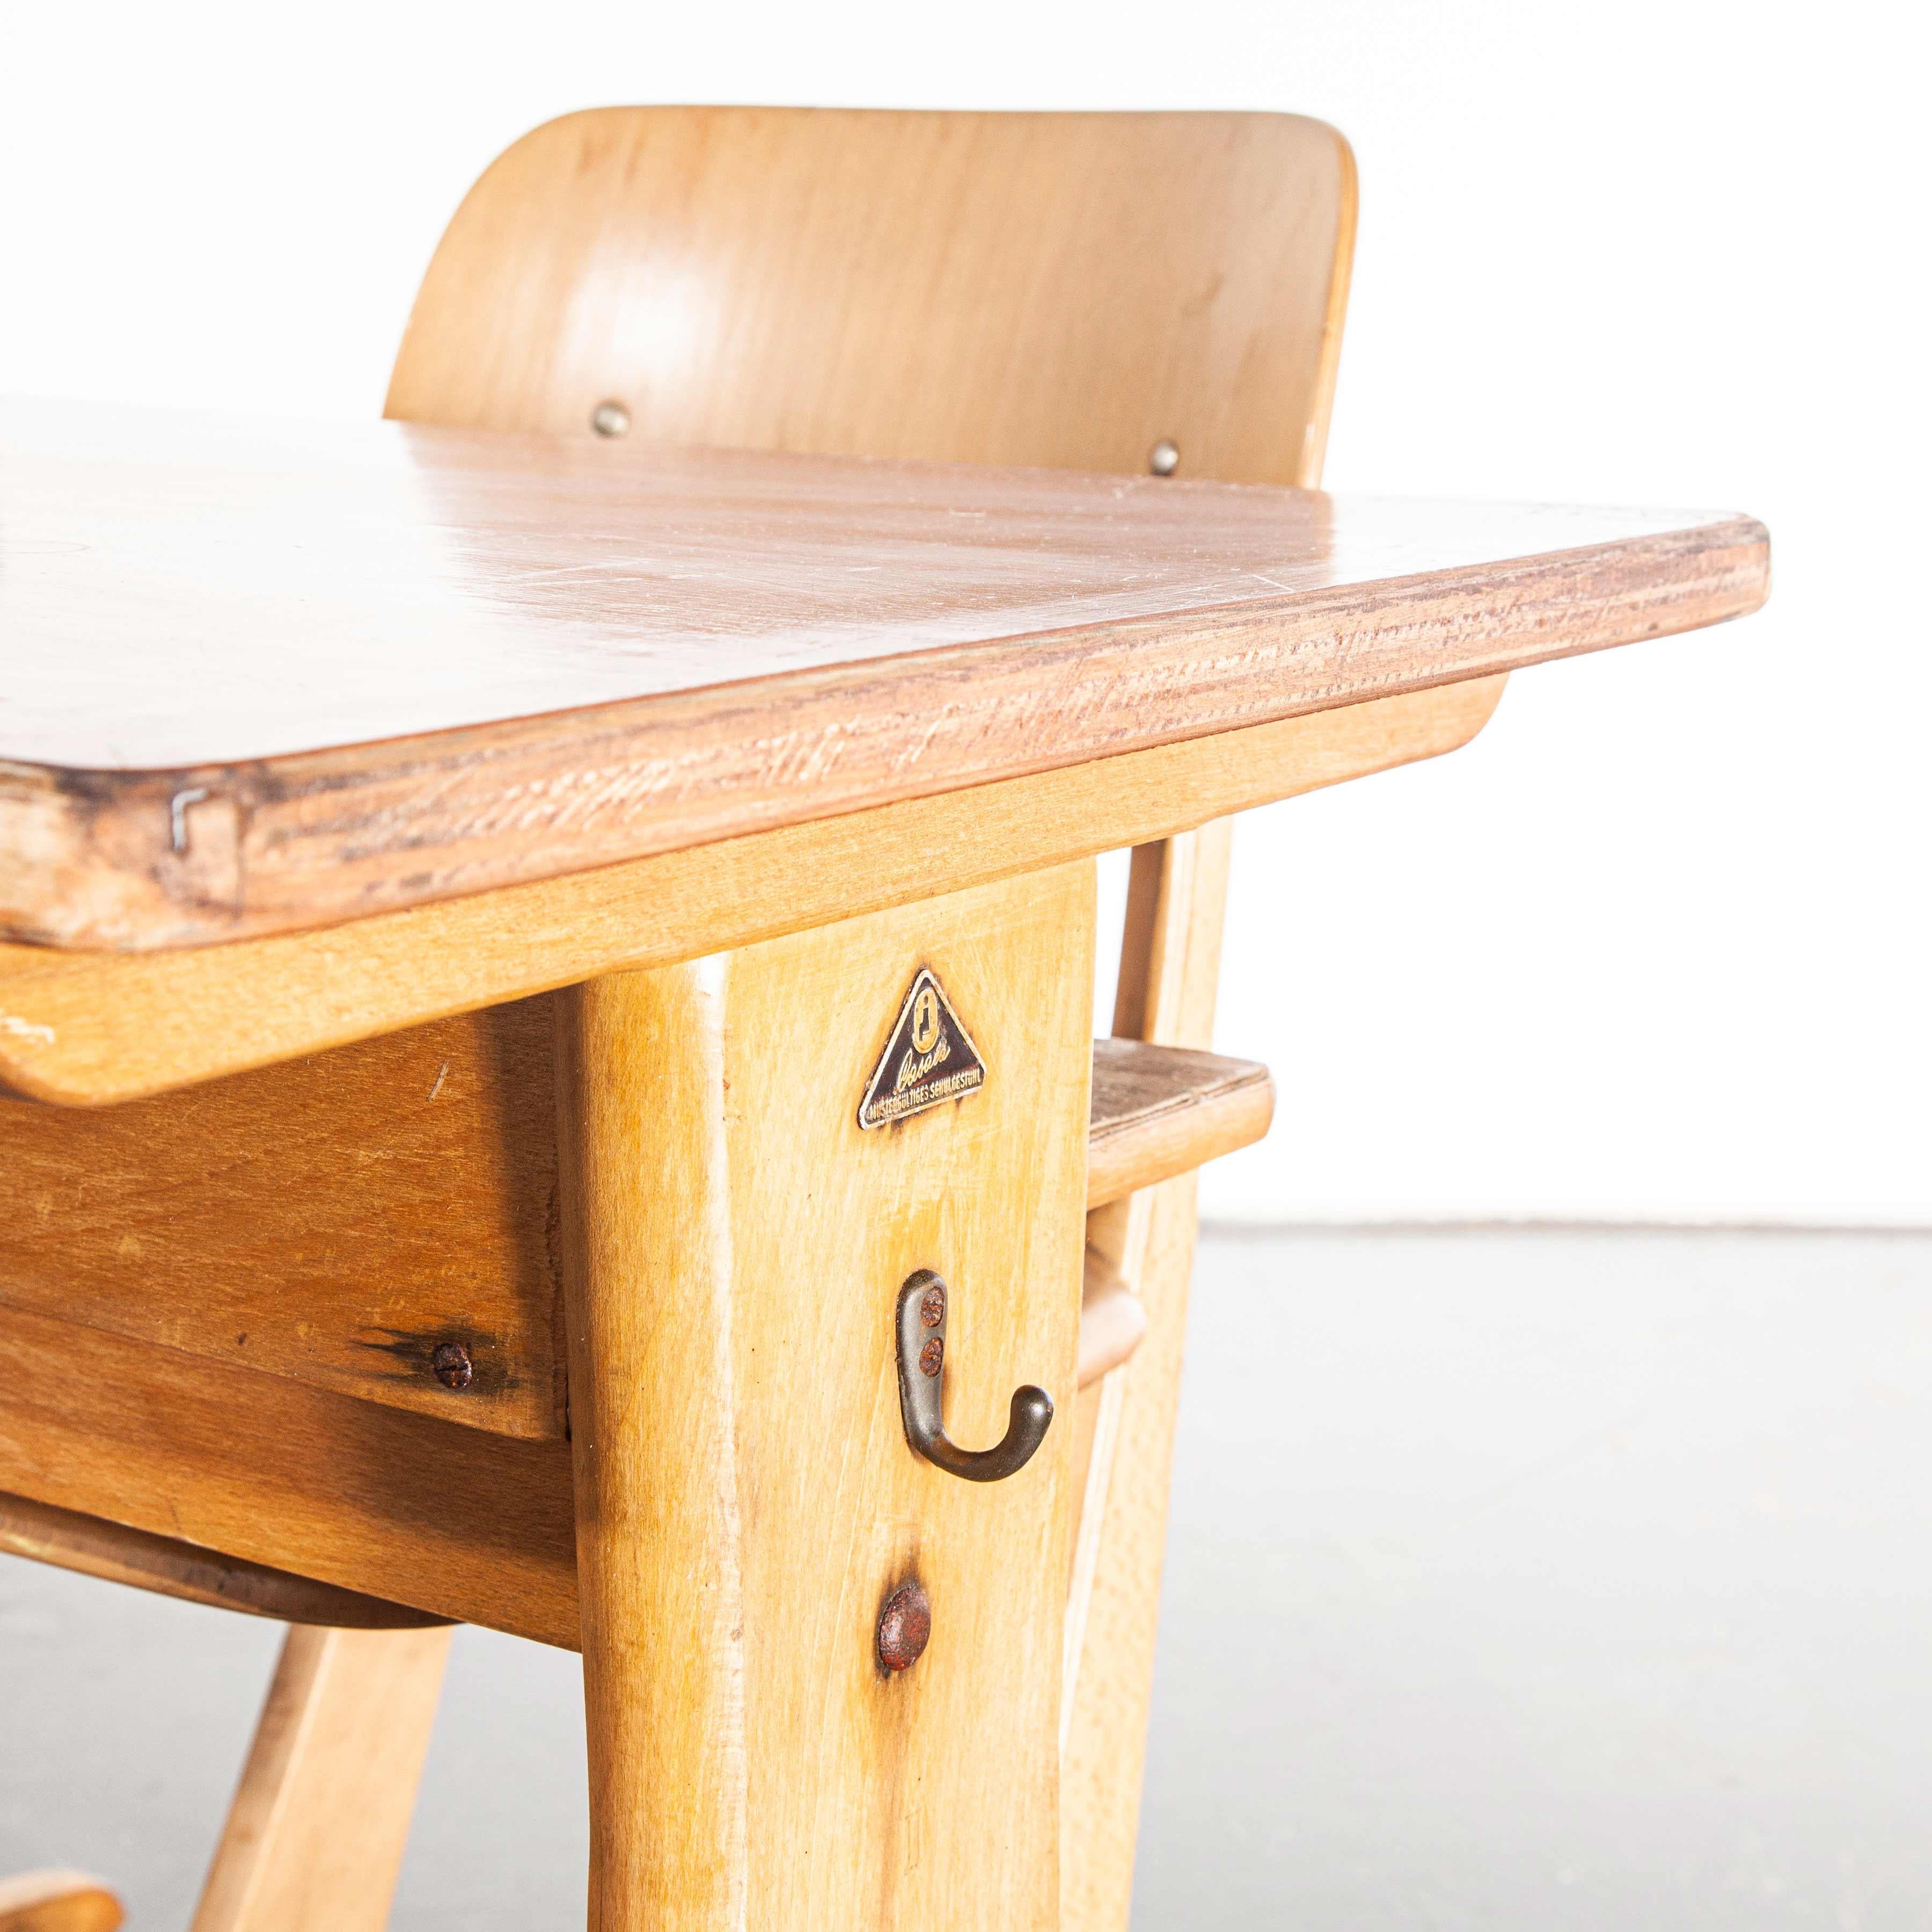 1950s children’s school desk
1960s Casala children’s desk and chair set. Casala is one of Germanys best known furniture producers still producing to this day. In our view the 1960s was their heyday. These practical slightly Scandi school